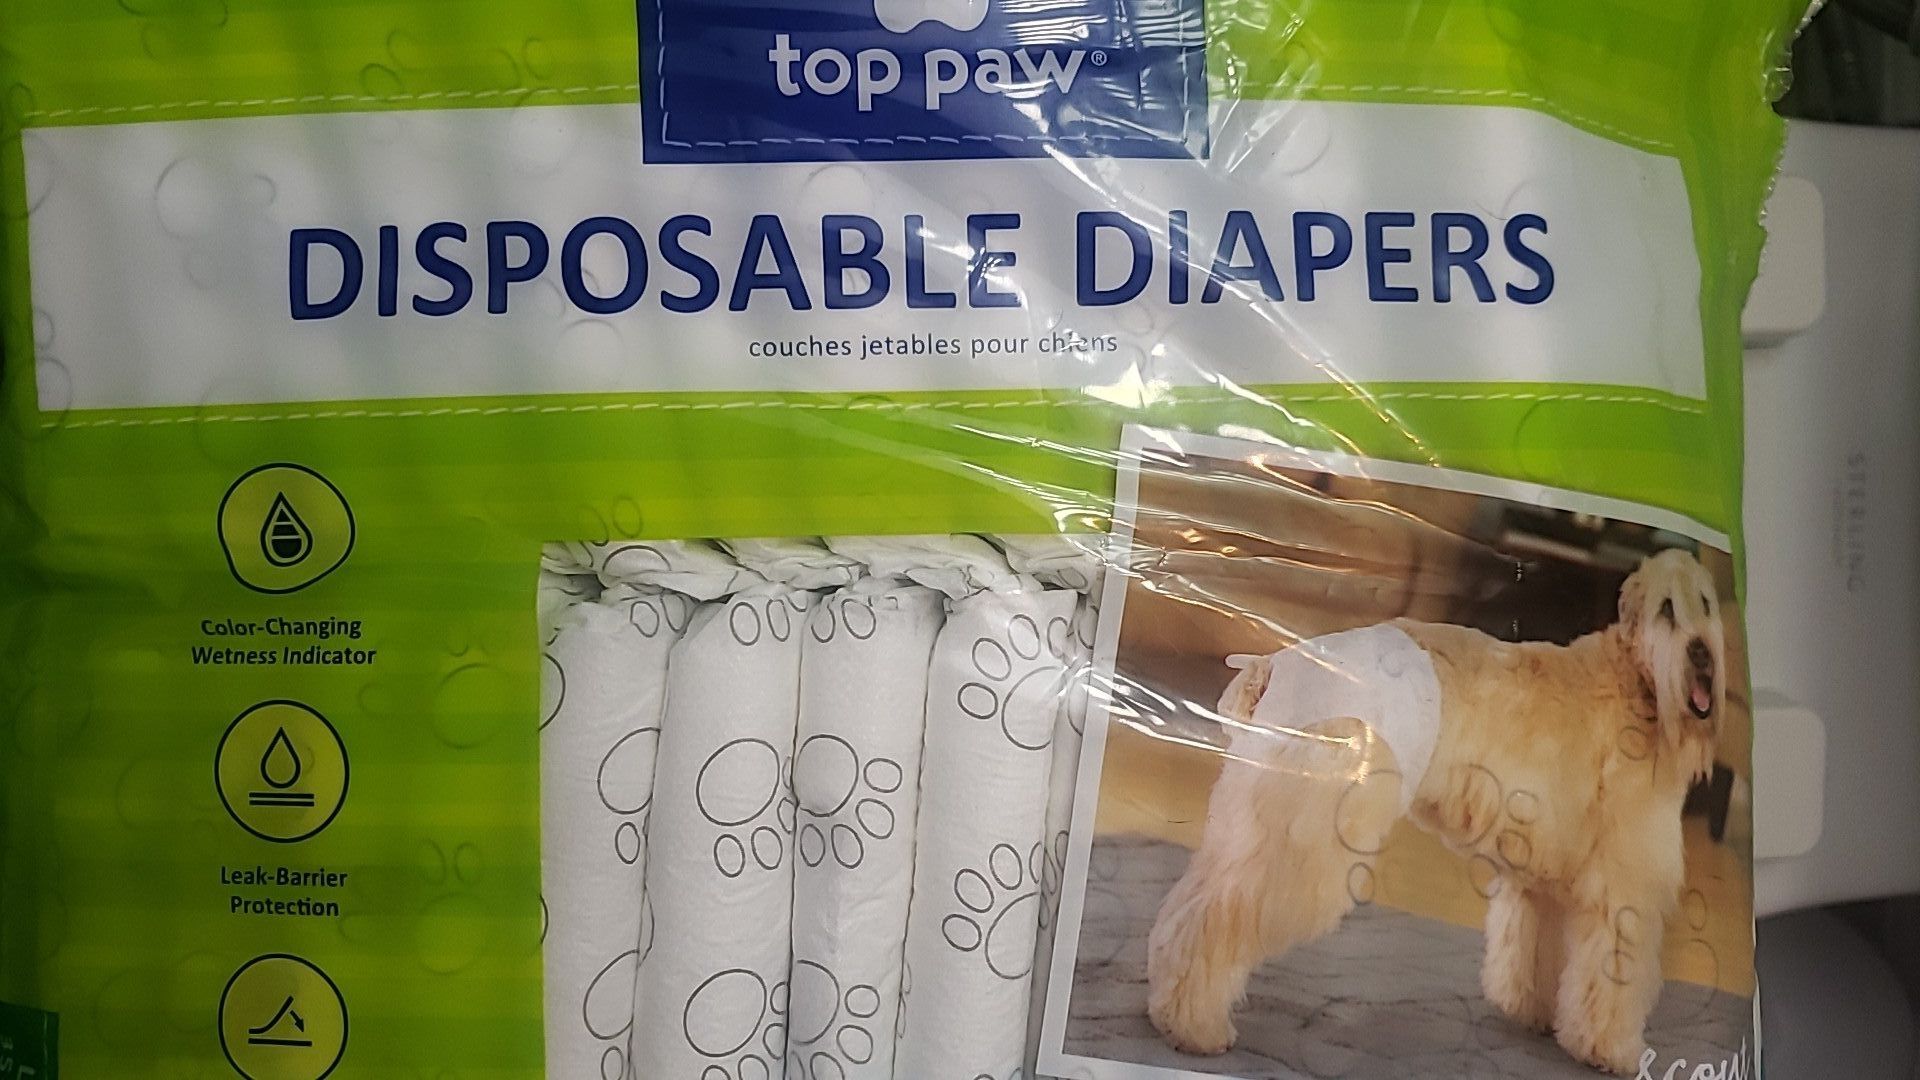 25 Top Paw Disposal Dog Diapers Size L